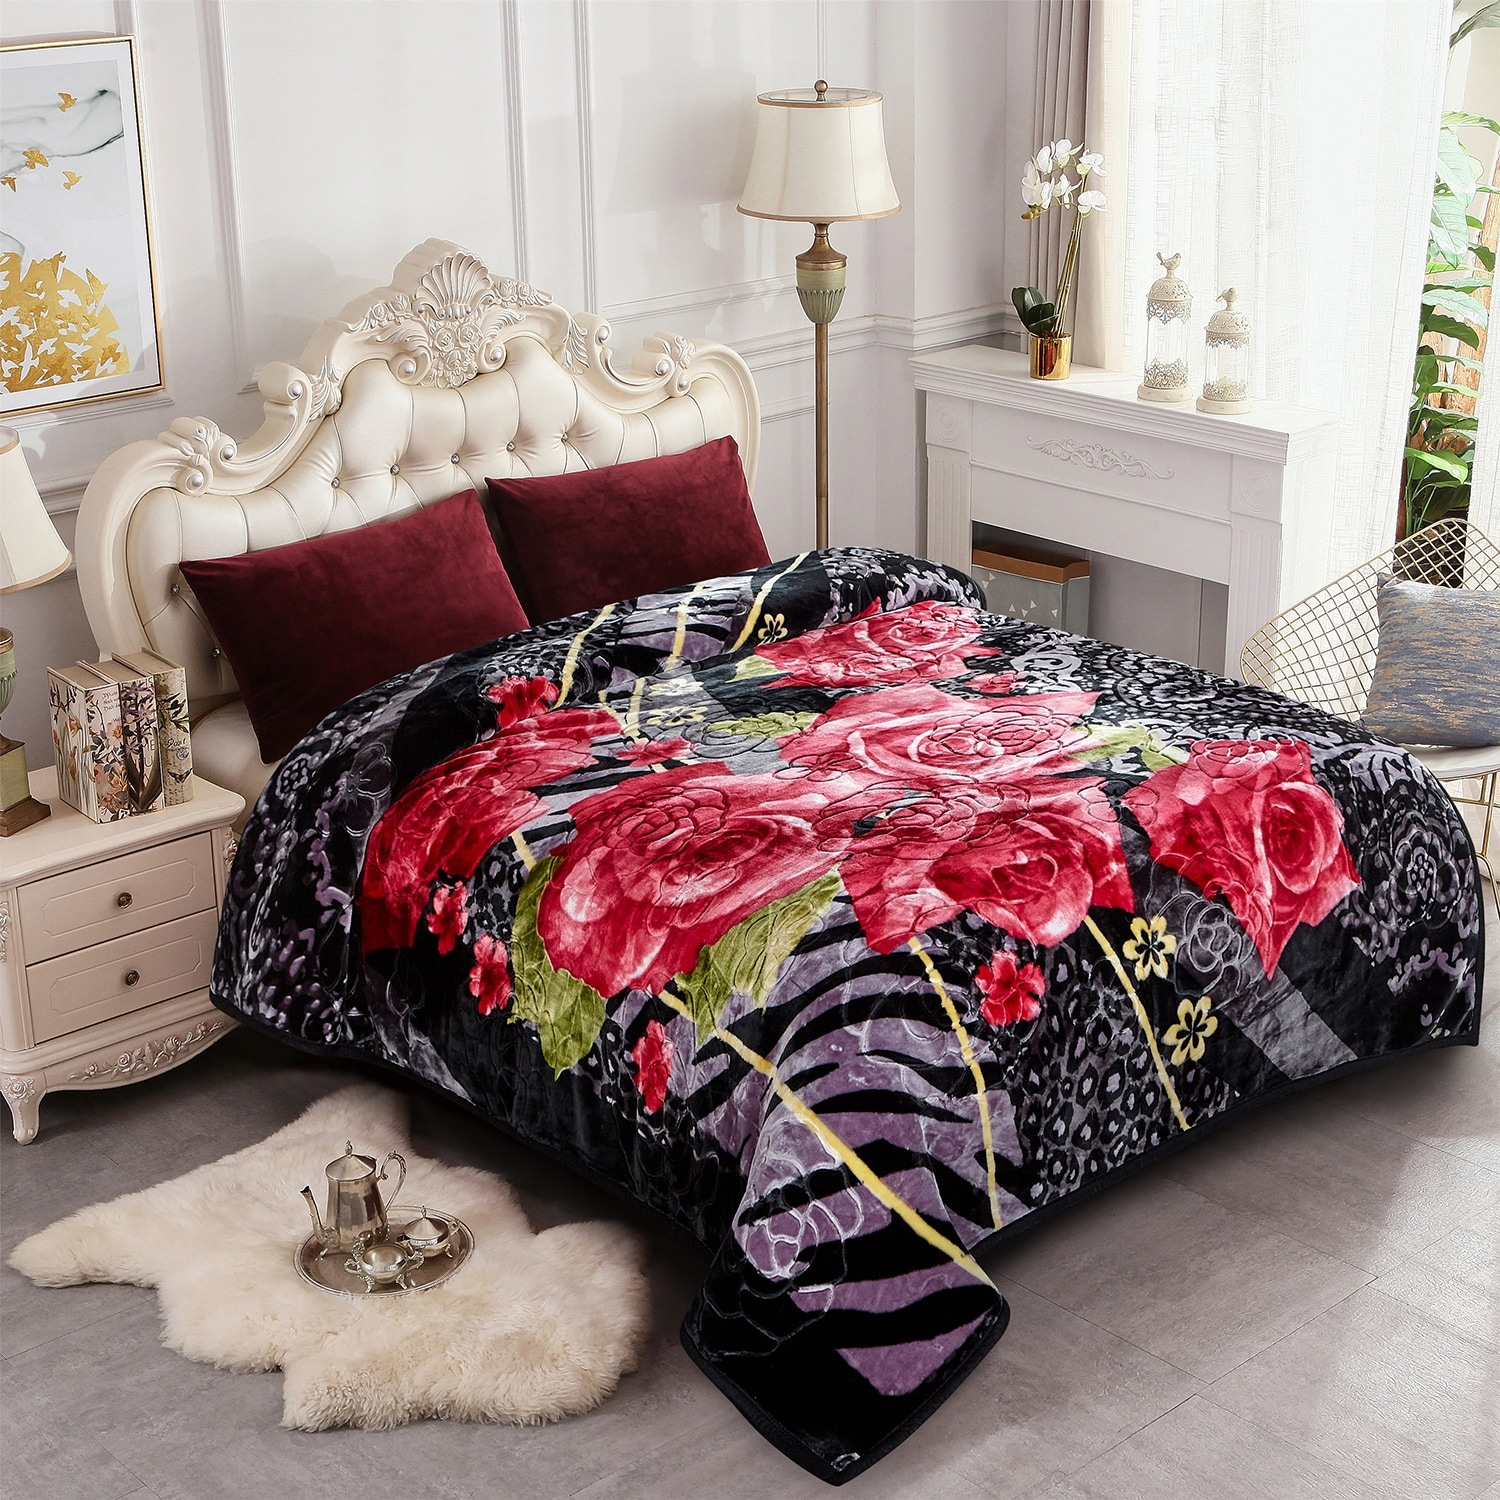 Heavy Crafted Thick Floral 9-pound Winter Fleece Blanket 85x95 - On Sale  - Bed Bath & Beyond - 32355550